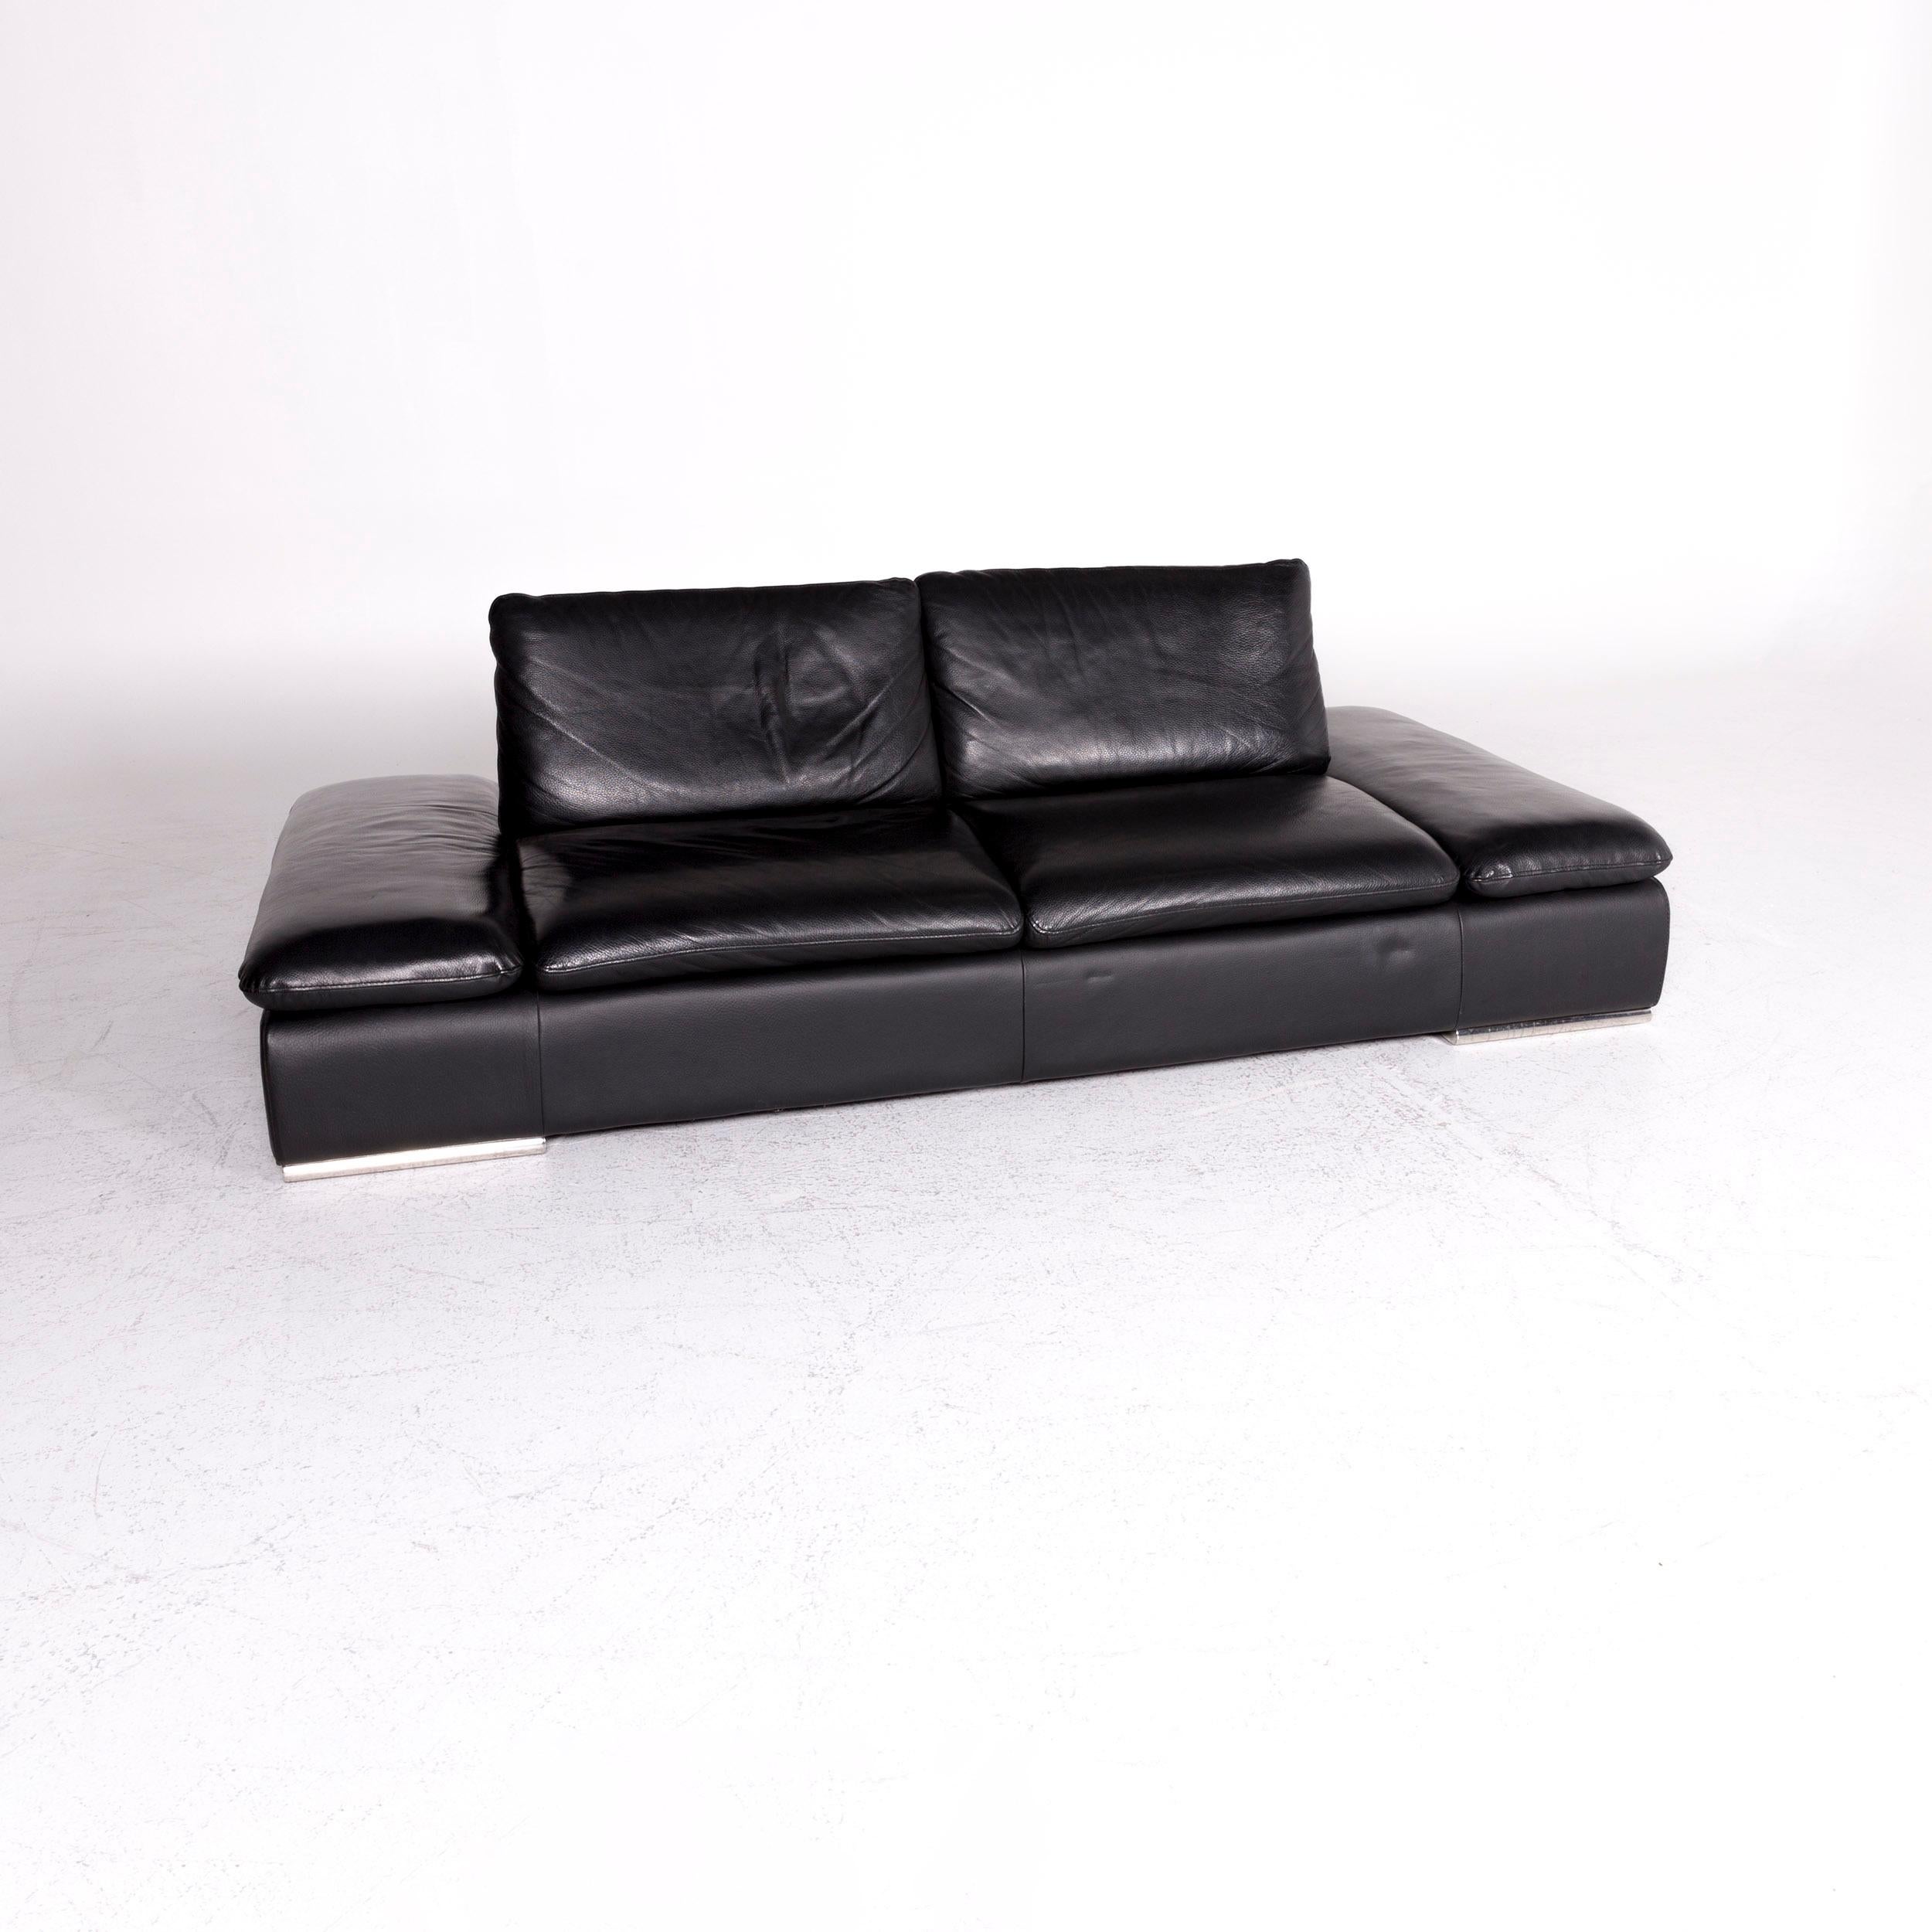 We bring to you a Koinor Evento designer leather sofa black two-seat couch.


Product measures in centimeters:

Depth: 114
Width: 234
Height: 75
Seat-height: 39
Rest-height: 39
Seat-depth: 53
Seat-width: 156
Back-height: 35.

 